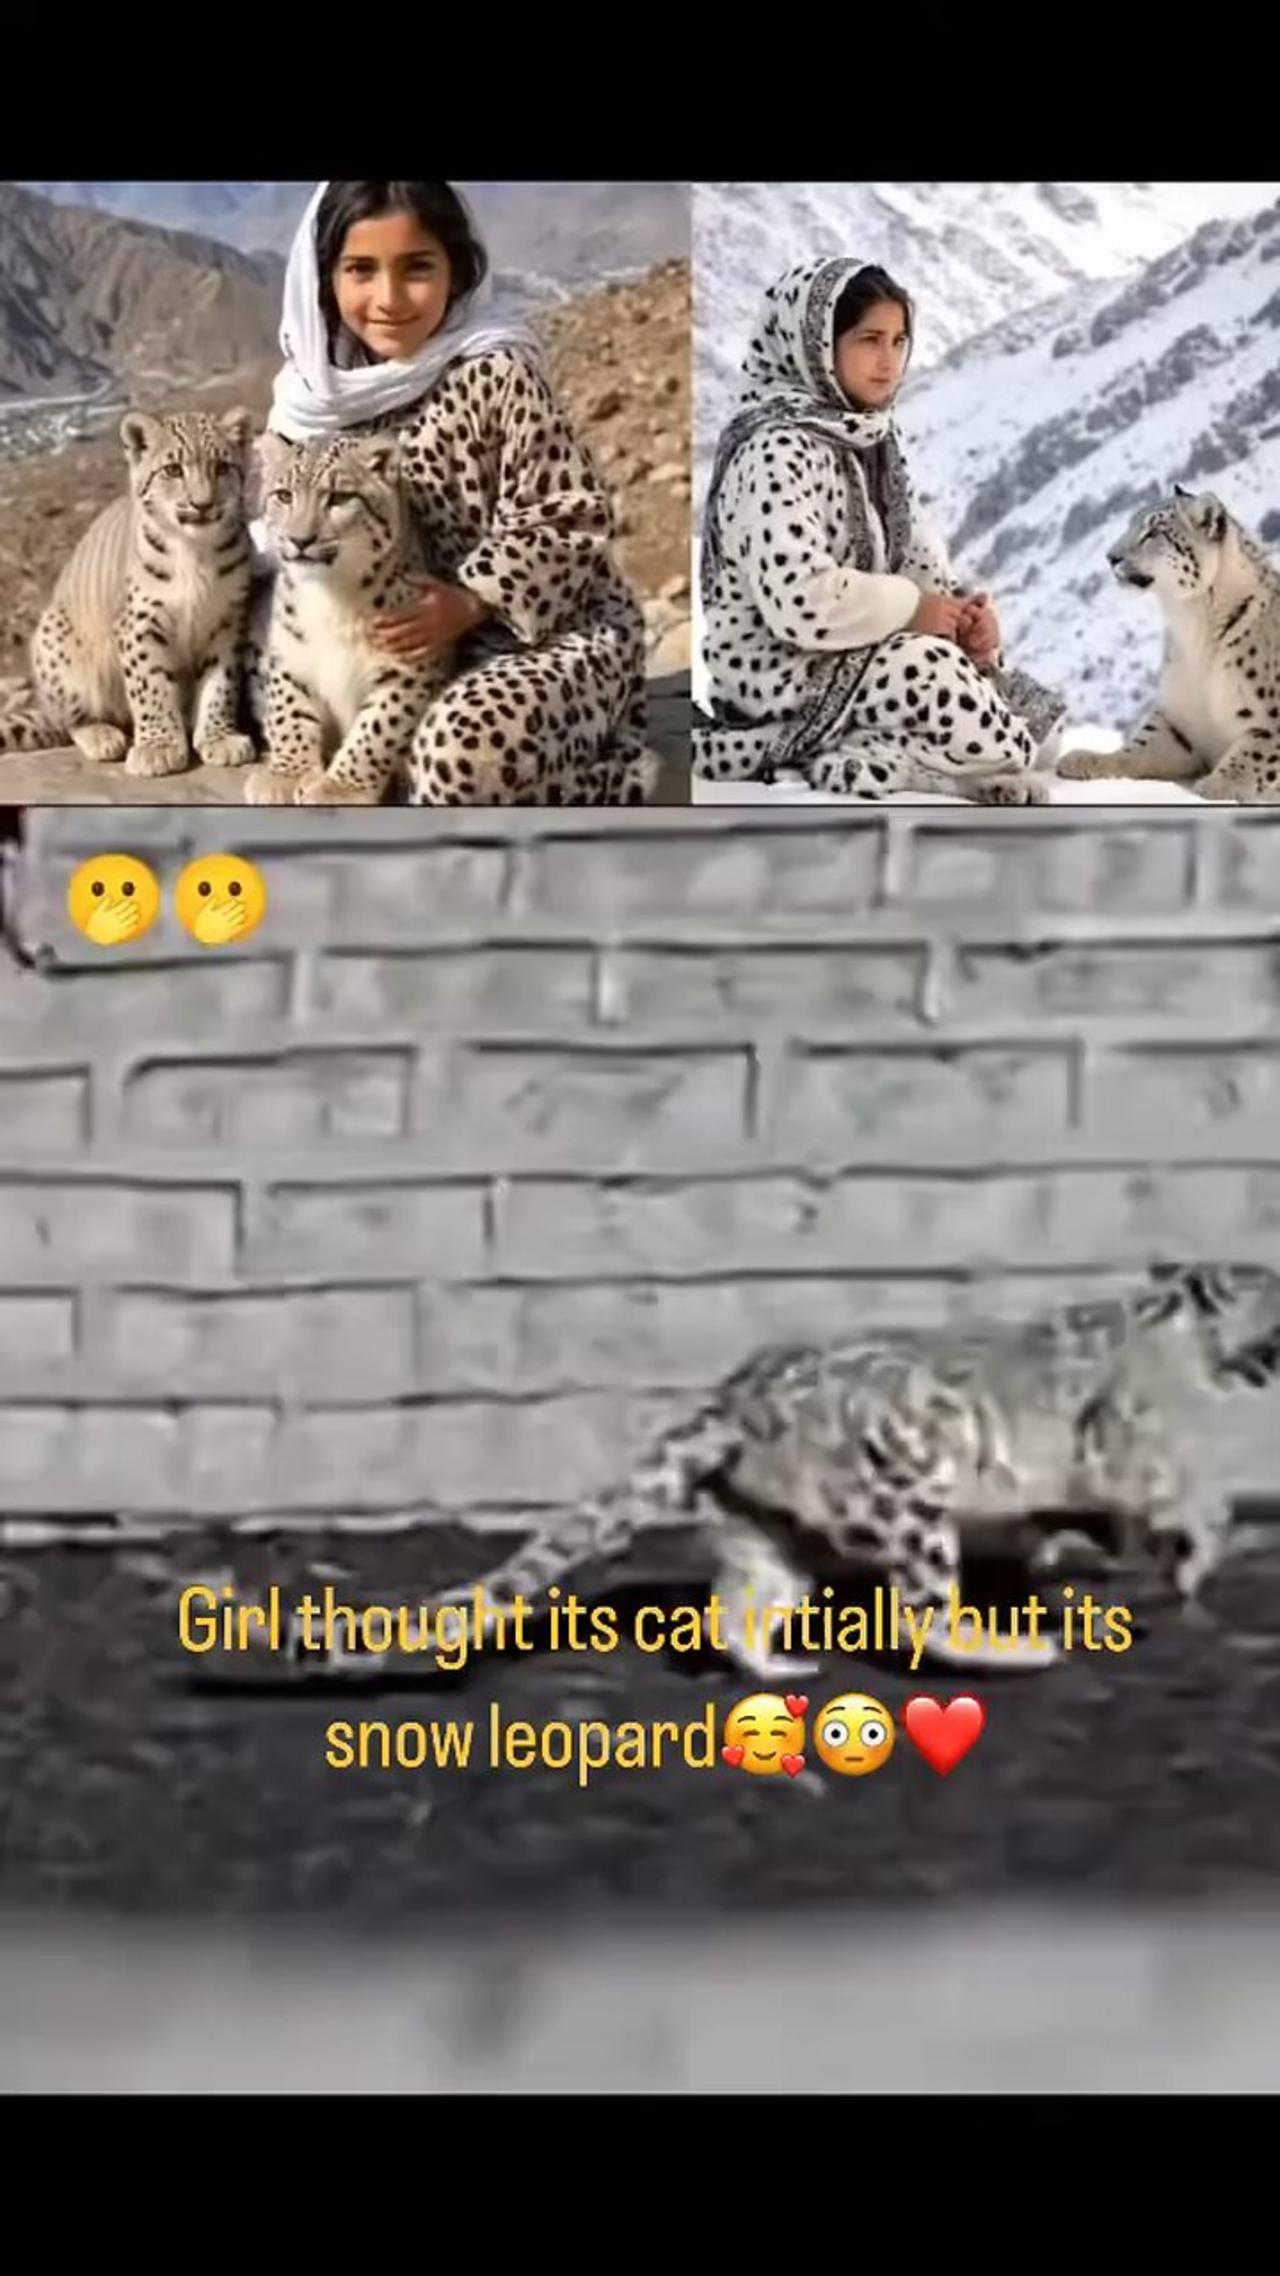 Girl thought its cat but it turn put to be snowy leopard